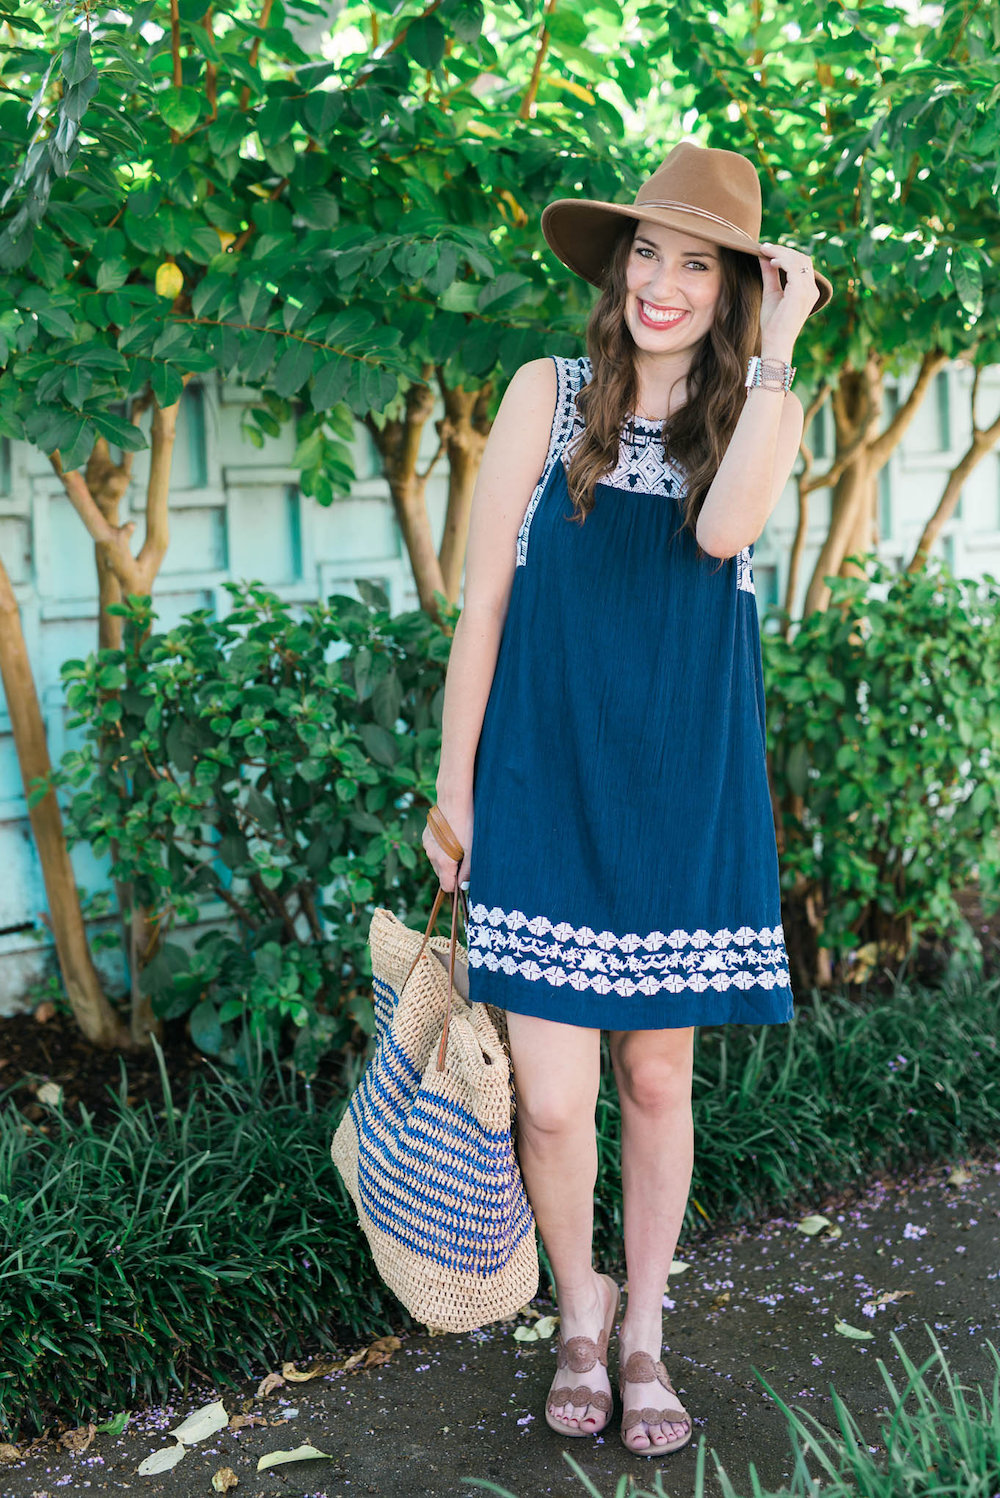 lucky bran navy embroidered shit dress, navy and blue embroidered shift dress, lauren jack rodger sandals, navy dress and brown rancher hat